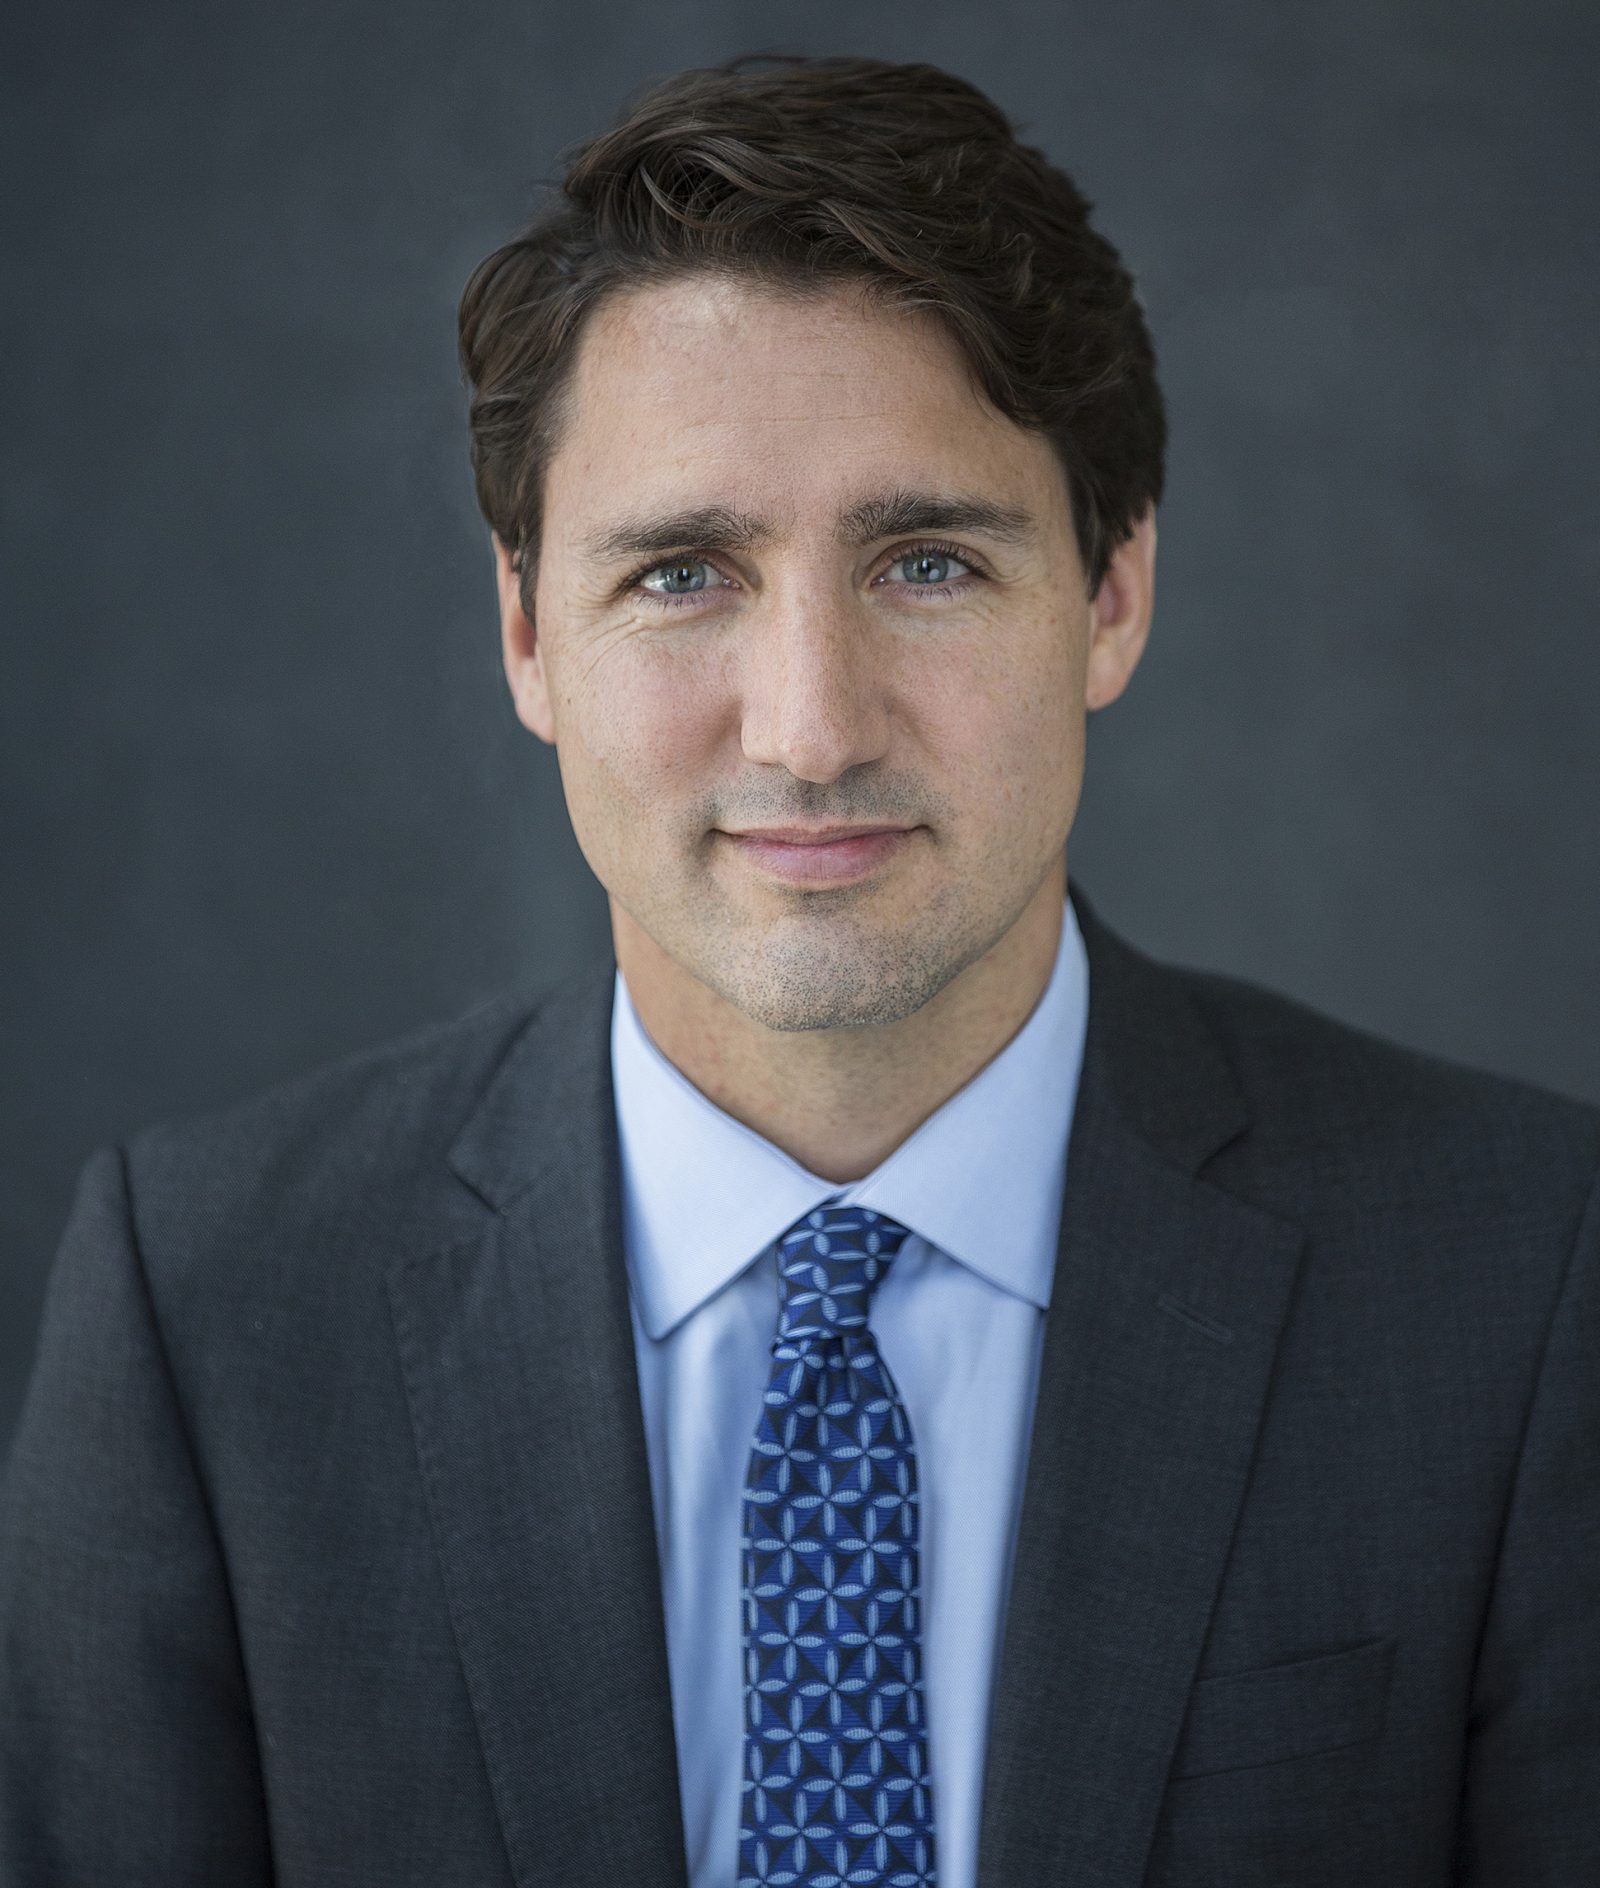 Prime Minister to host town hall at Brock University ...
